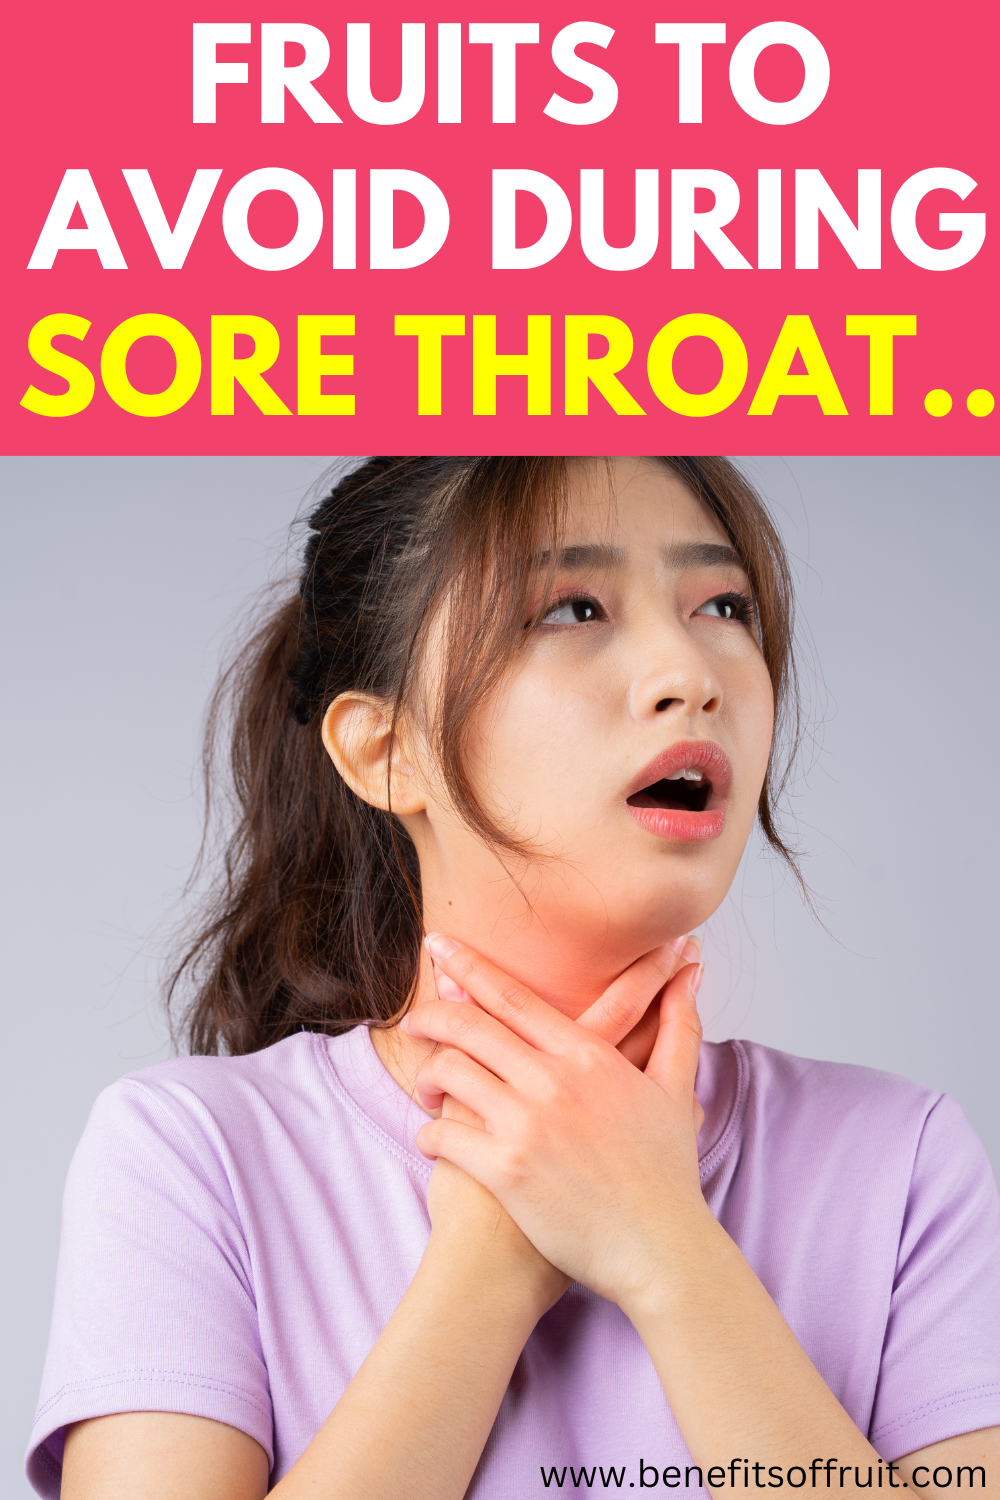 Fruits To Avoid During Sore Throat